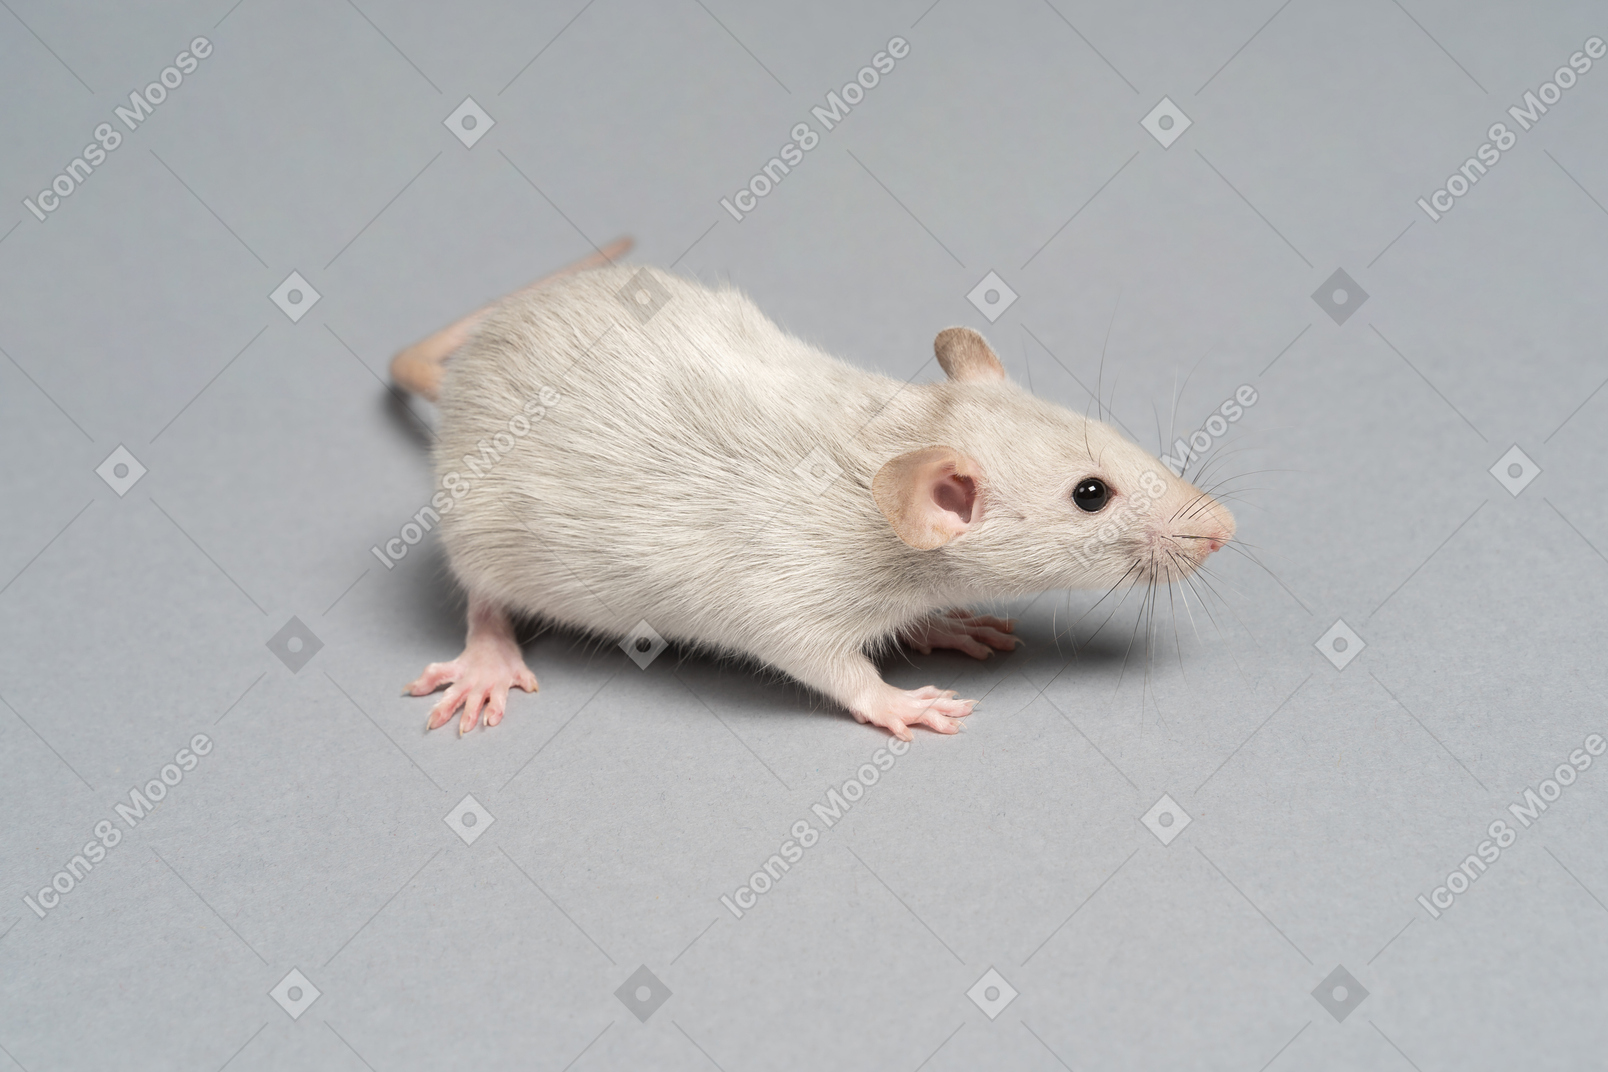 A nice fluffy gray mouse